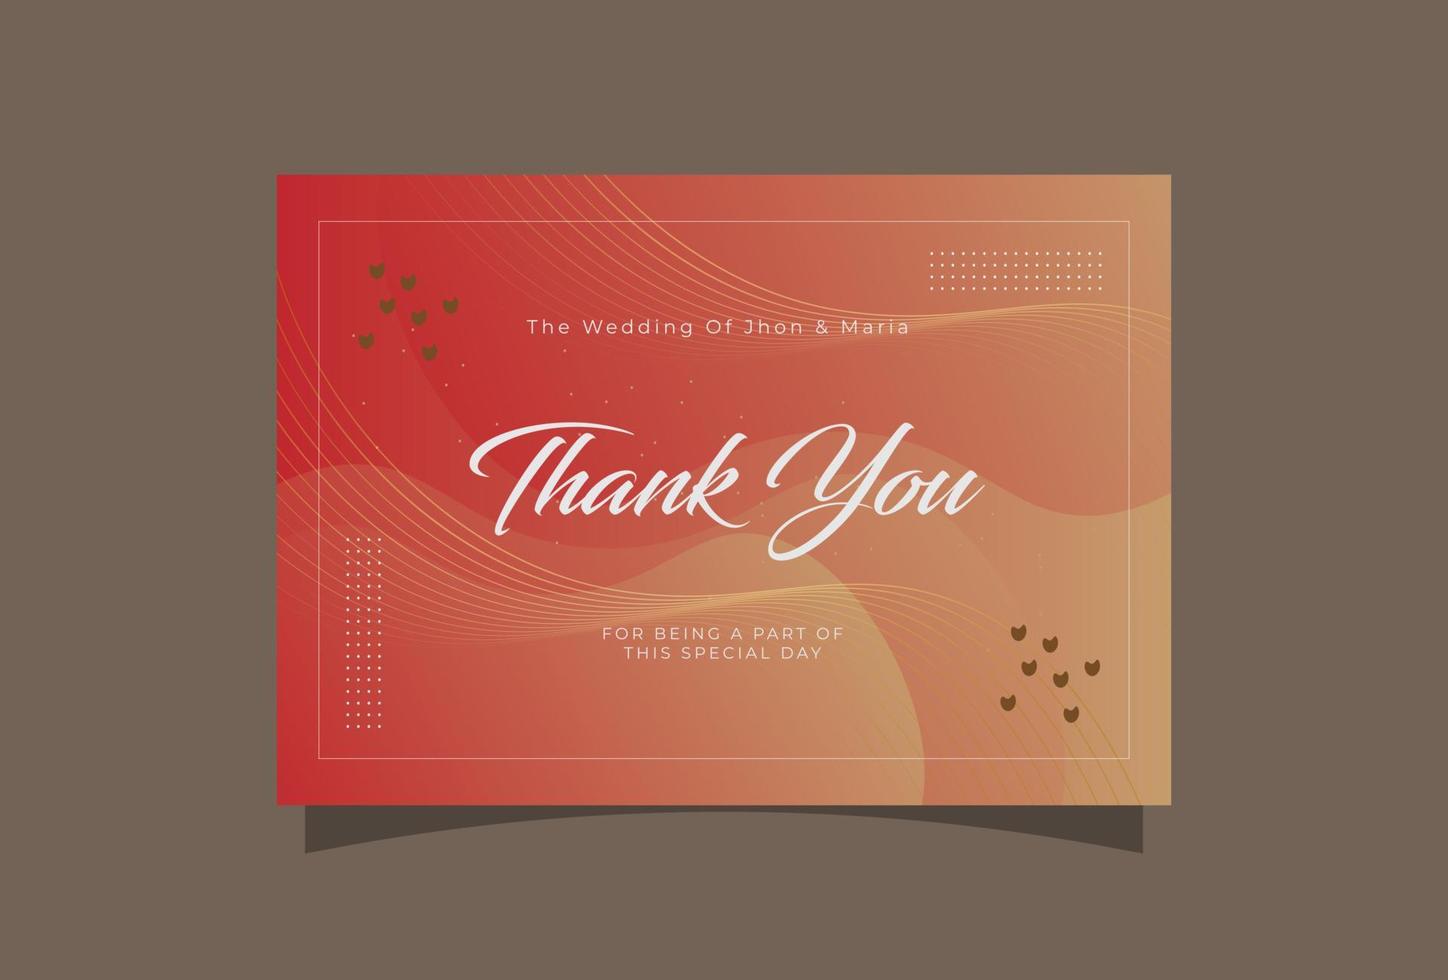 We are getting married thank you card vector